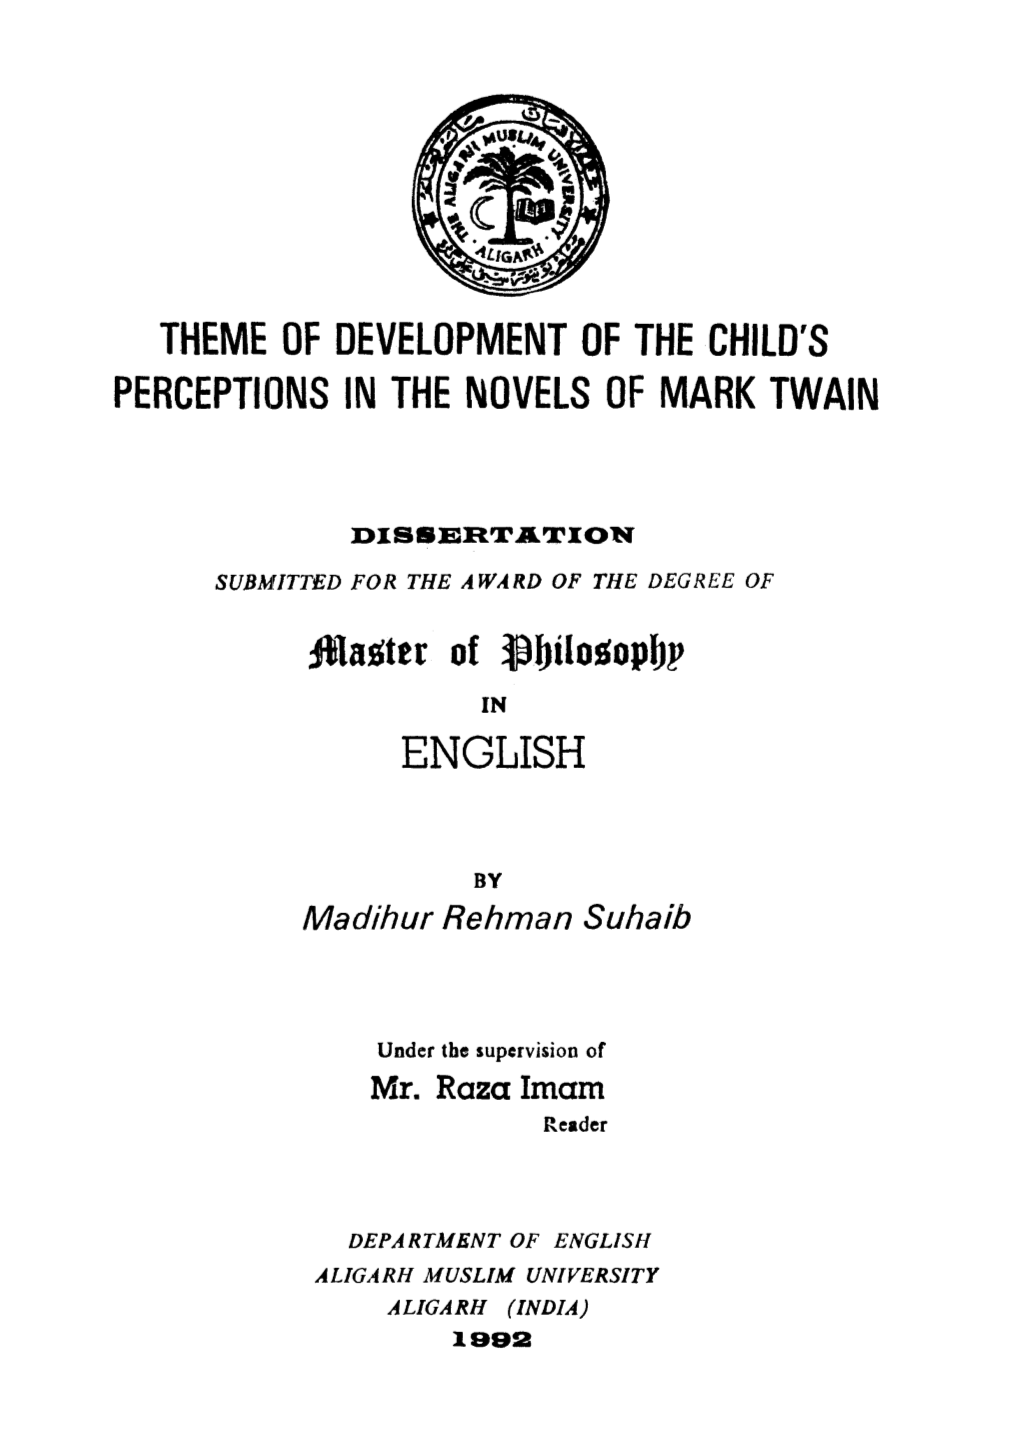 Theme of Development of the Child's Perceptions in the Novels of Mark Twain